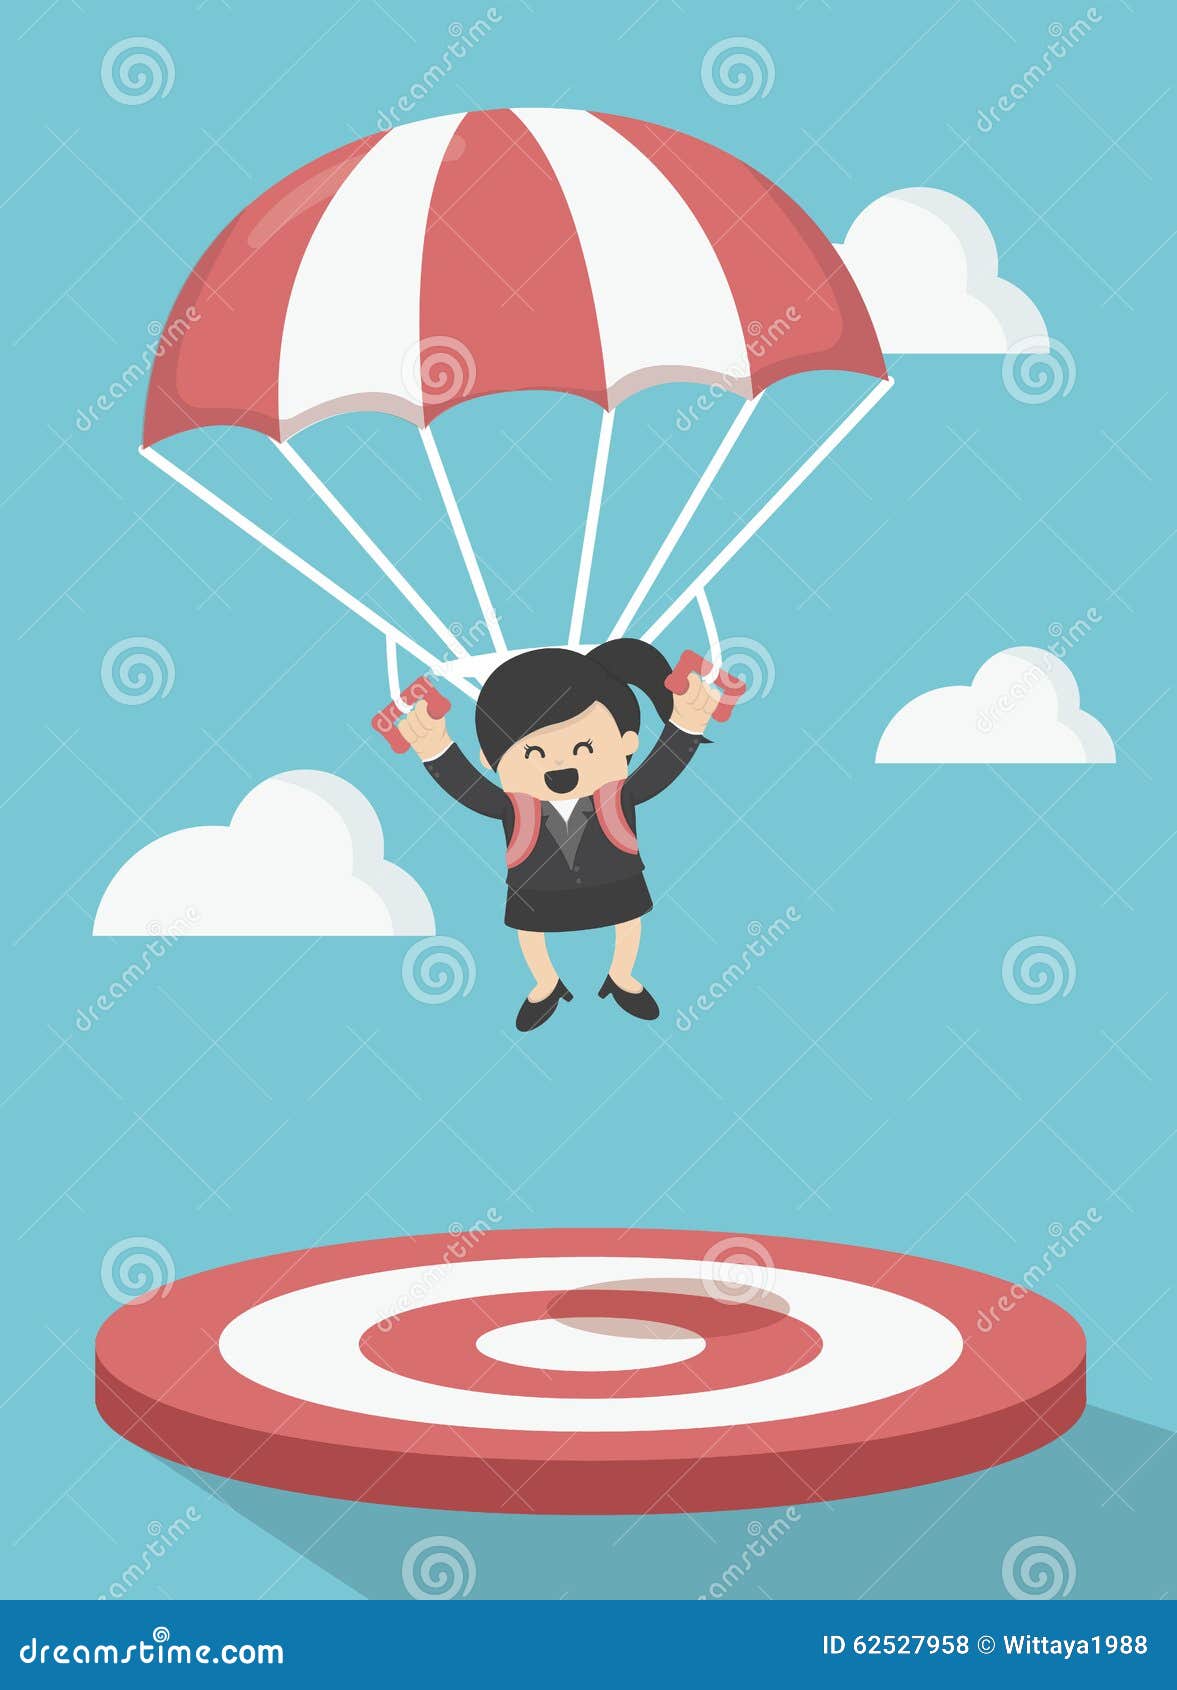 Business Woman Focused on a Target Stock Vector - Illustration of happy ...